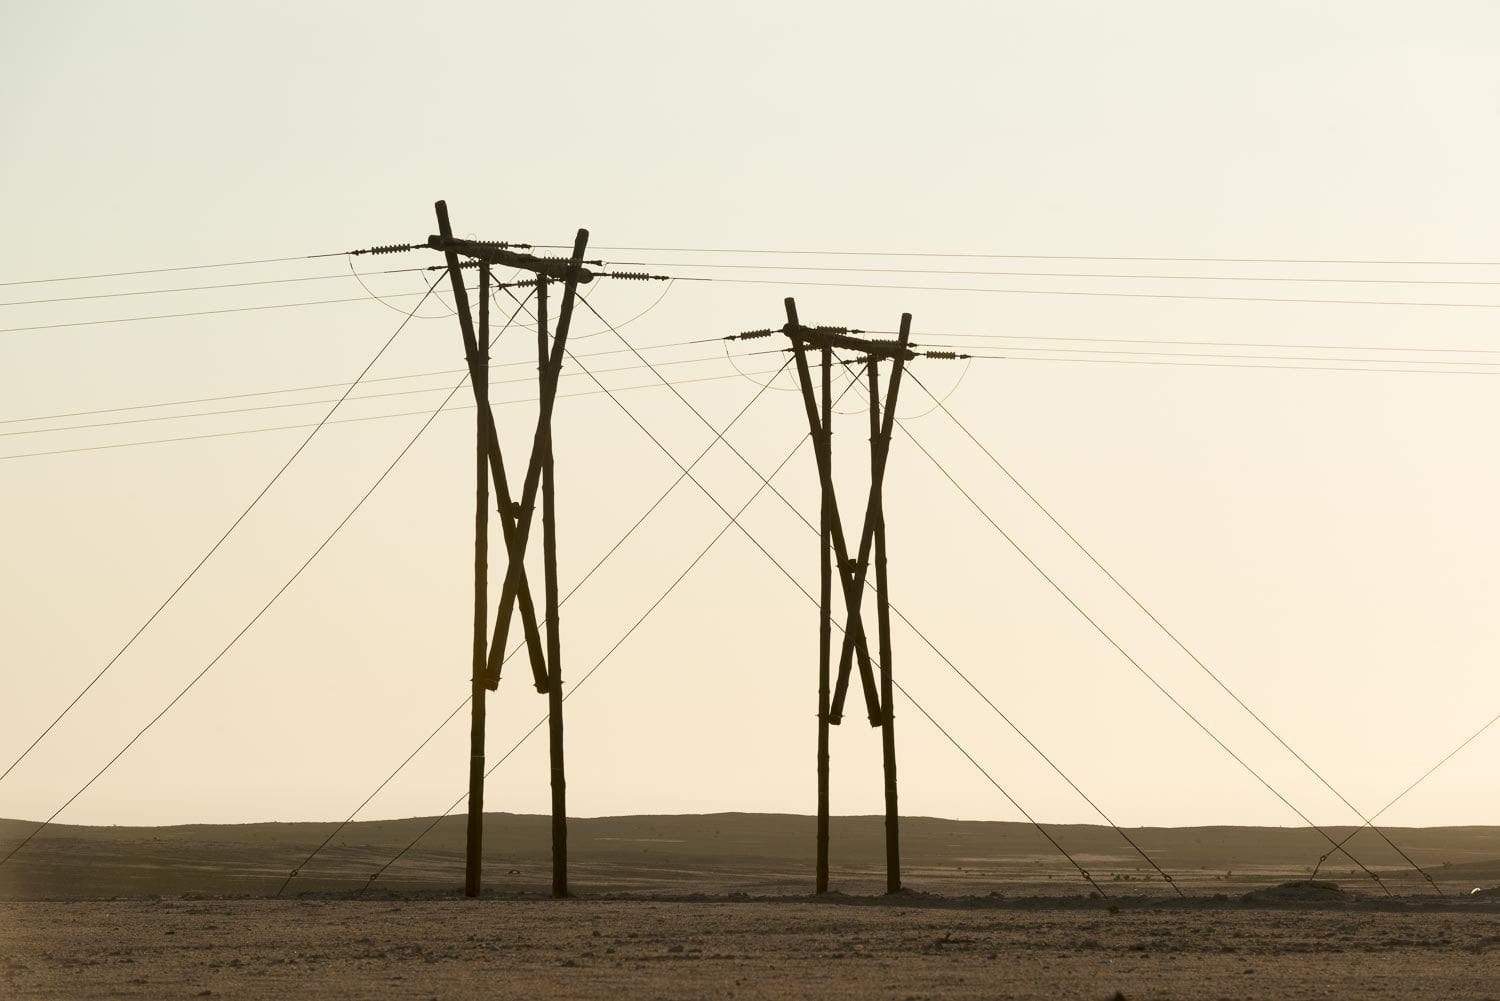 Long-standing electricity towers with many wires connected, Namibia #8